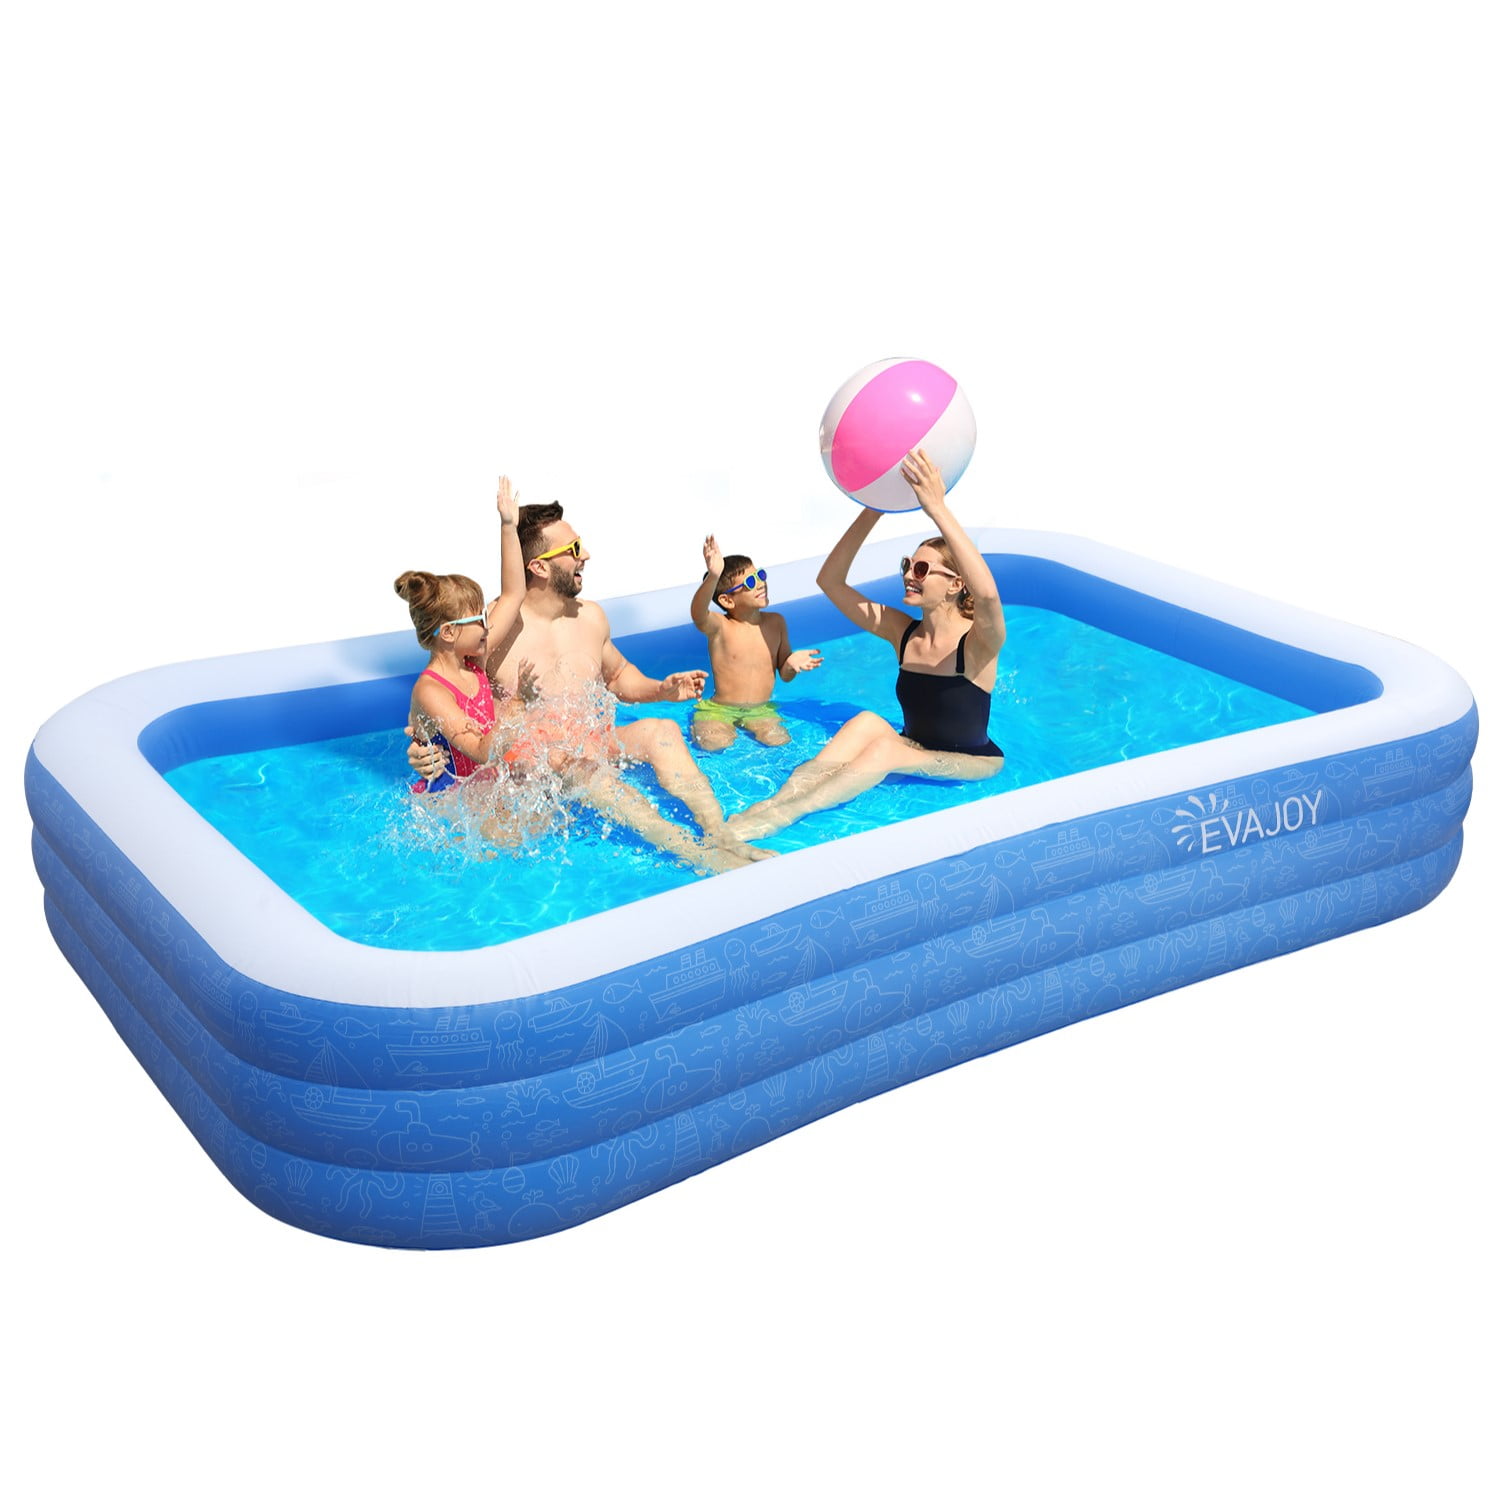 EVAJOY Blow Up Pool, Thickened Inflatable Pool for Kids, Adults, Family,  9.83 x 5.97 x 1.67 ft